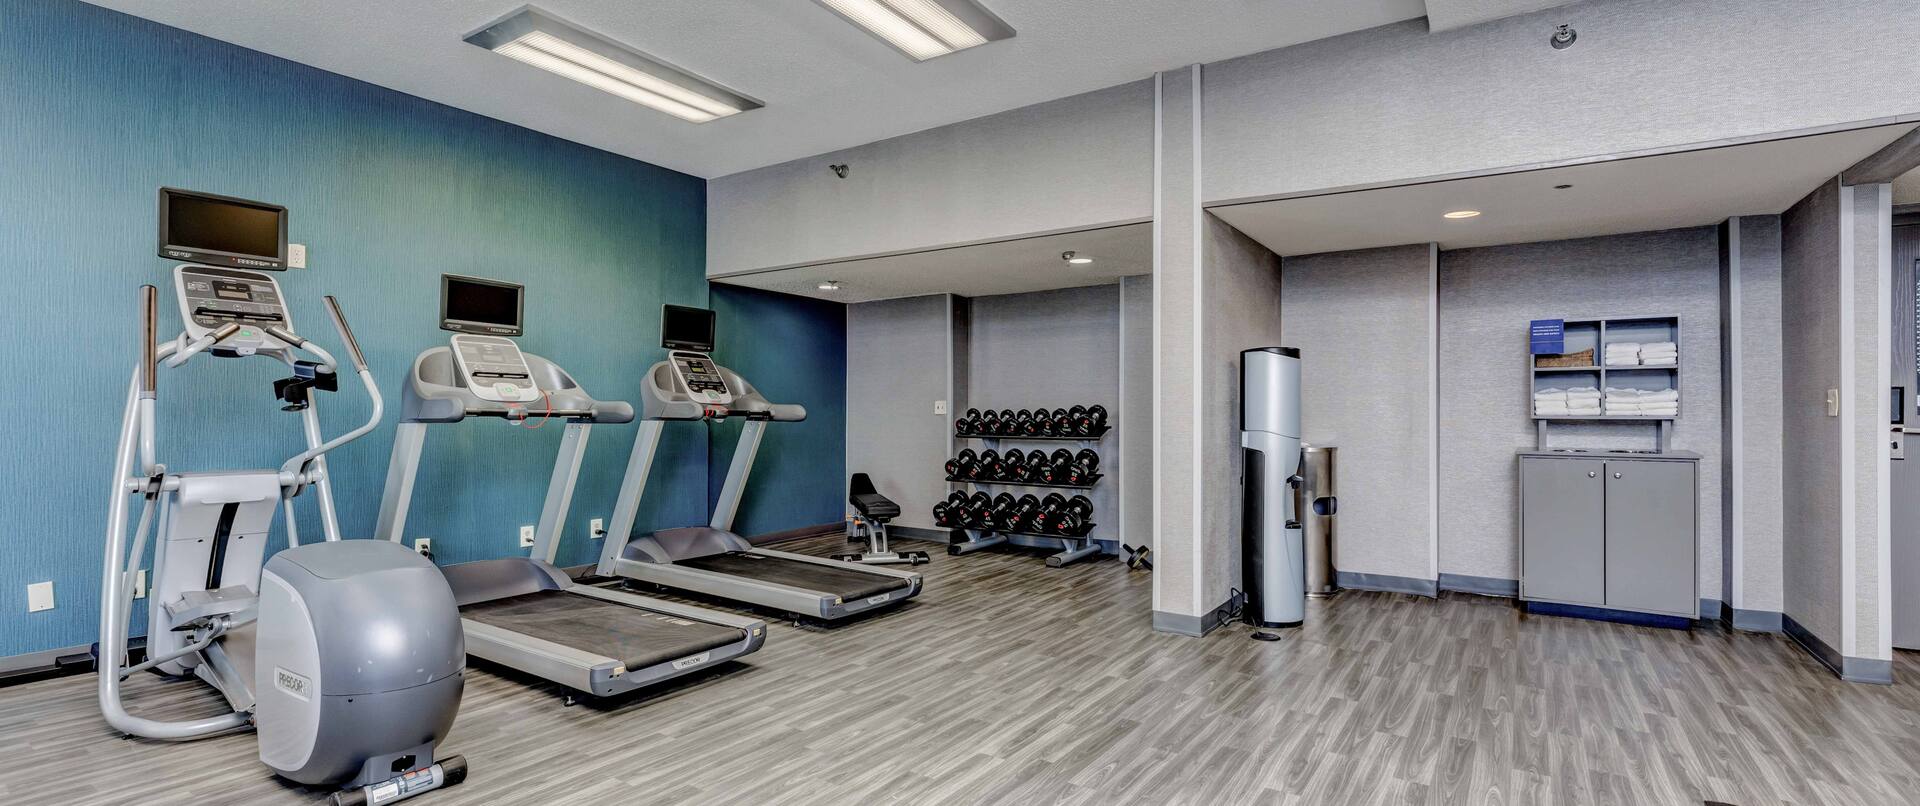 Treadmills Weights and Recumbent Bike in Fitness Center